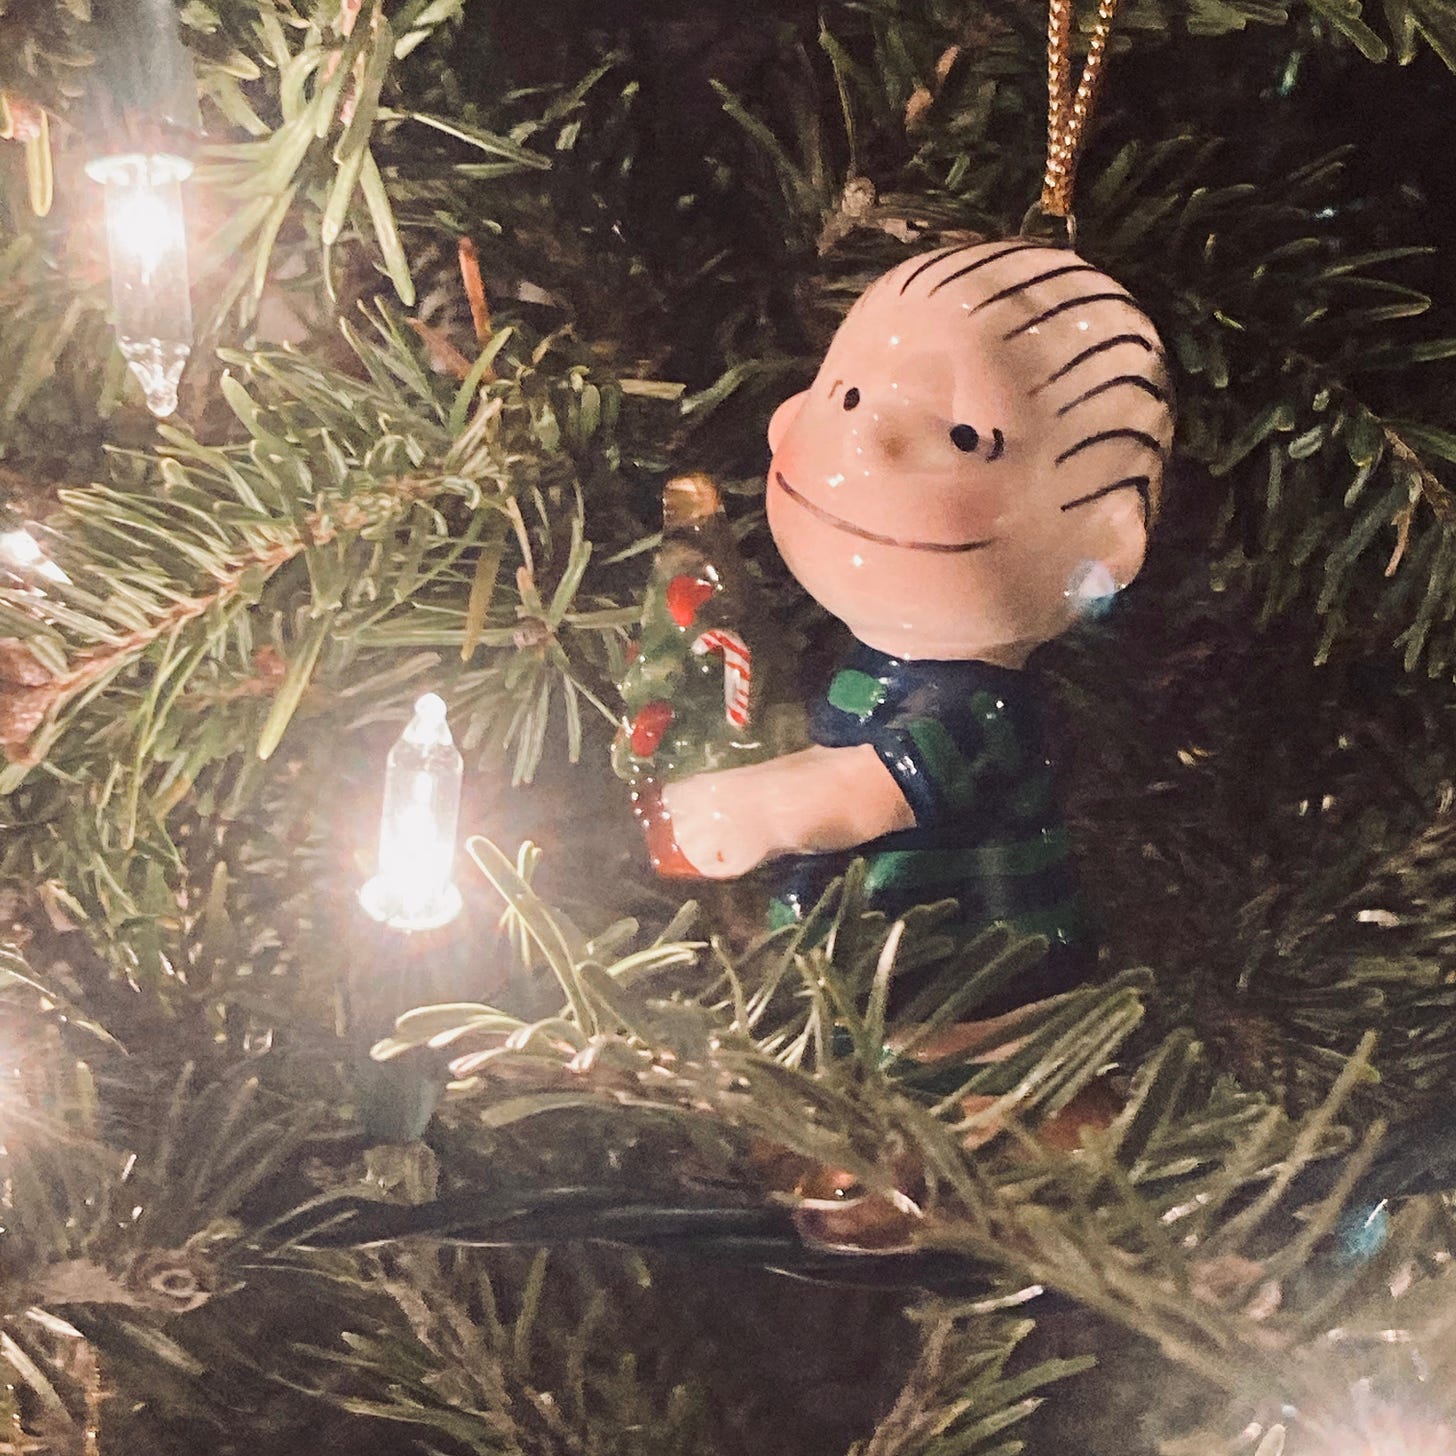 Ceramic ornament of Linus from Peanuts hanging in a Christmas tree